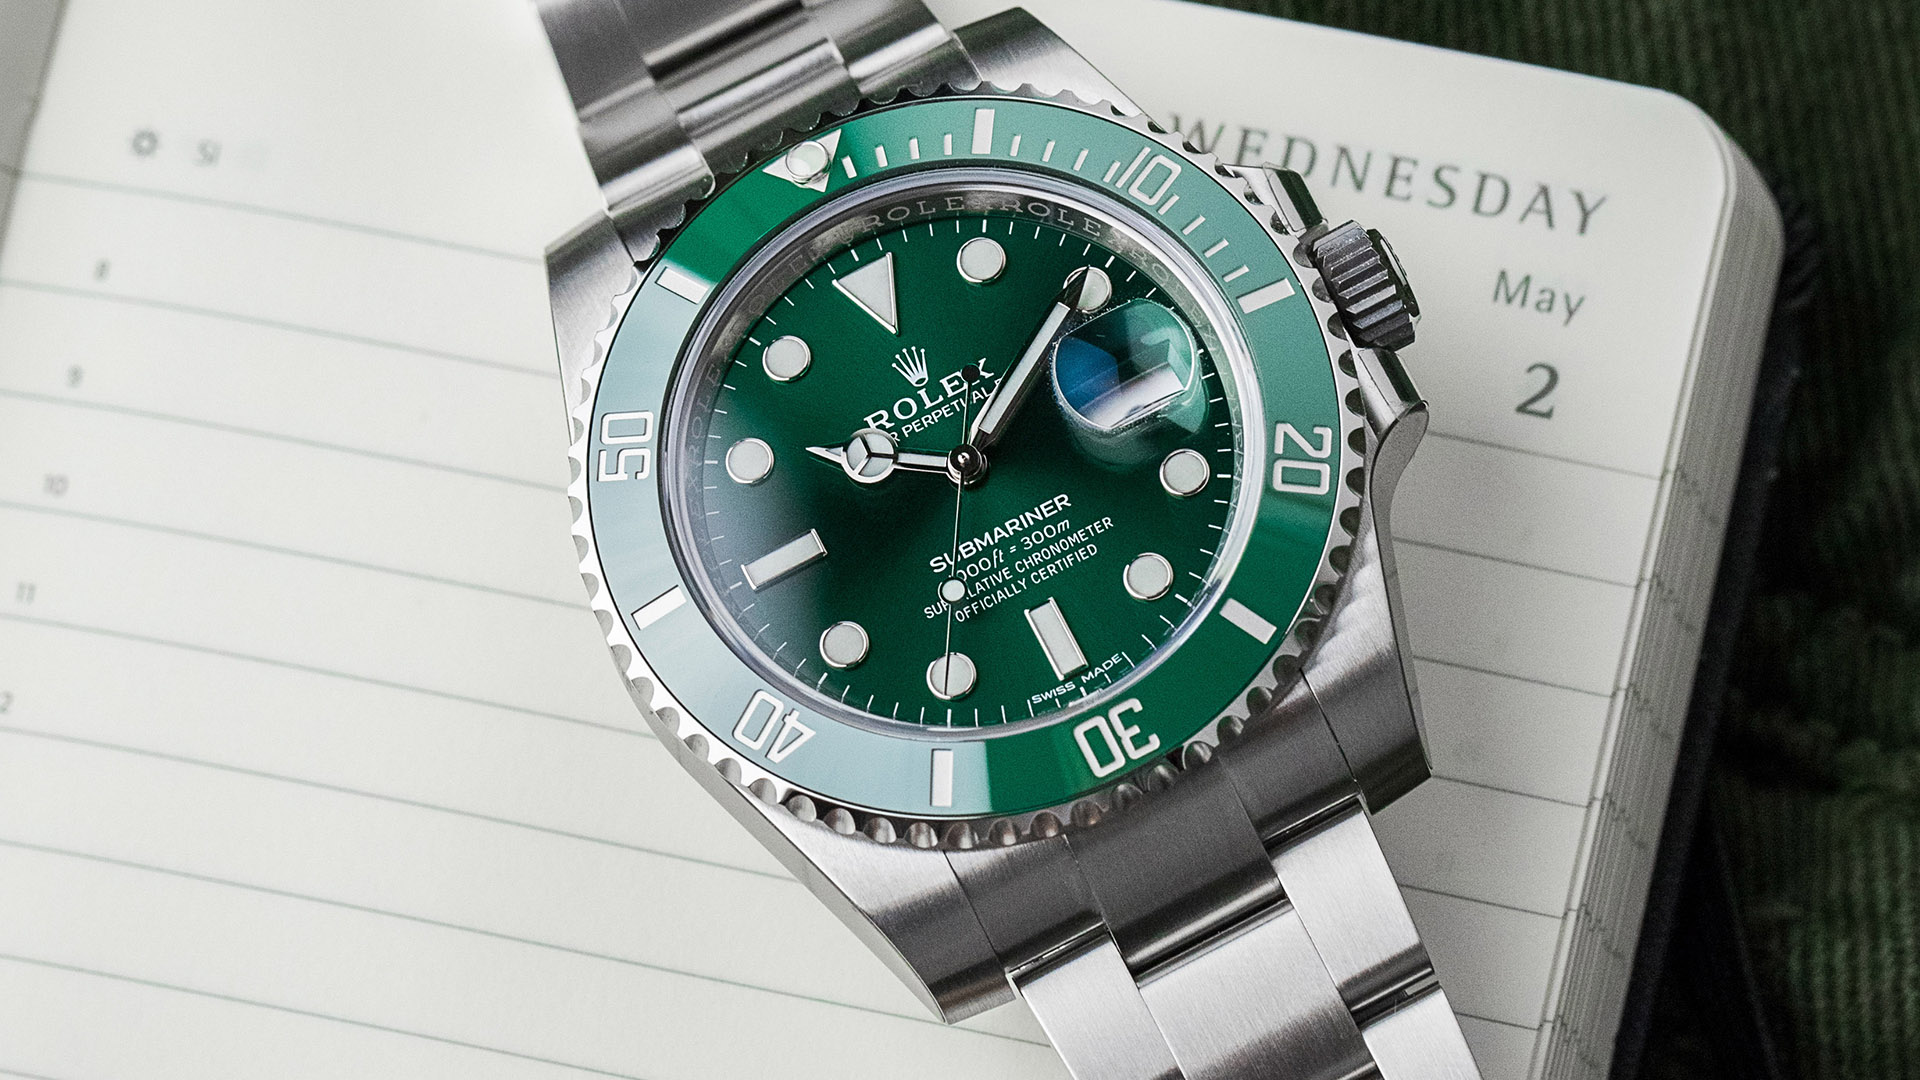 Discover the 5 Best Rolex Watches for Investment in 2020